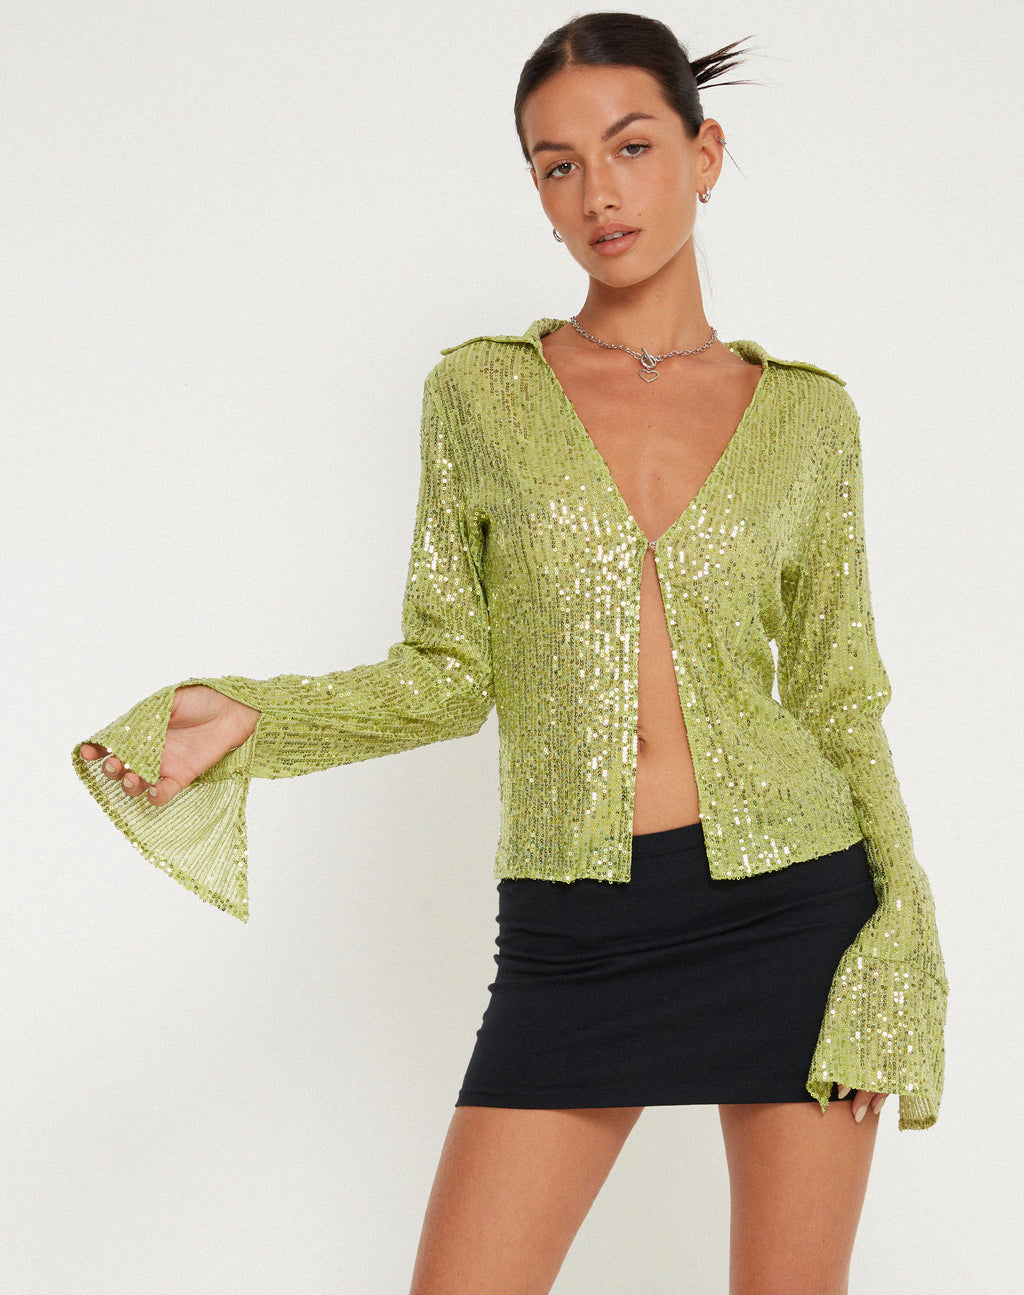 Gedza Button Top in Drape Sequin Lime Green